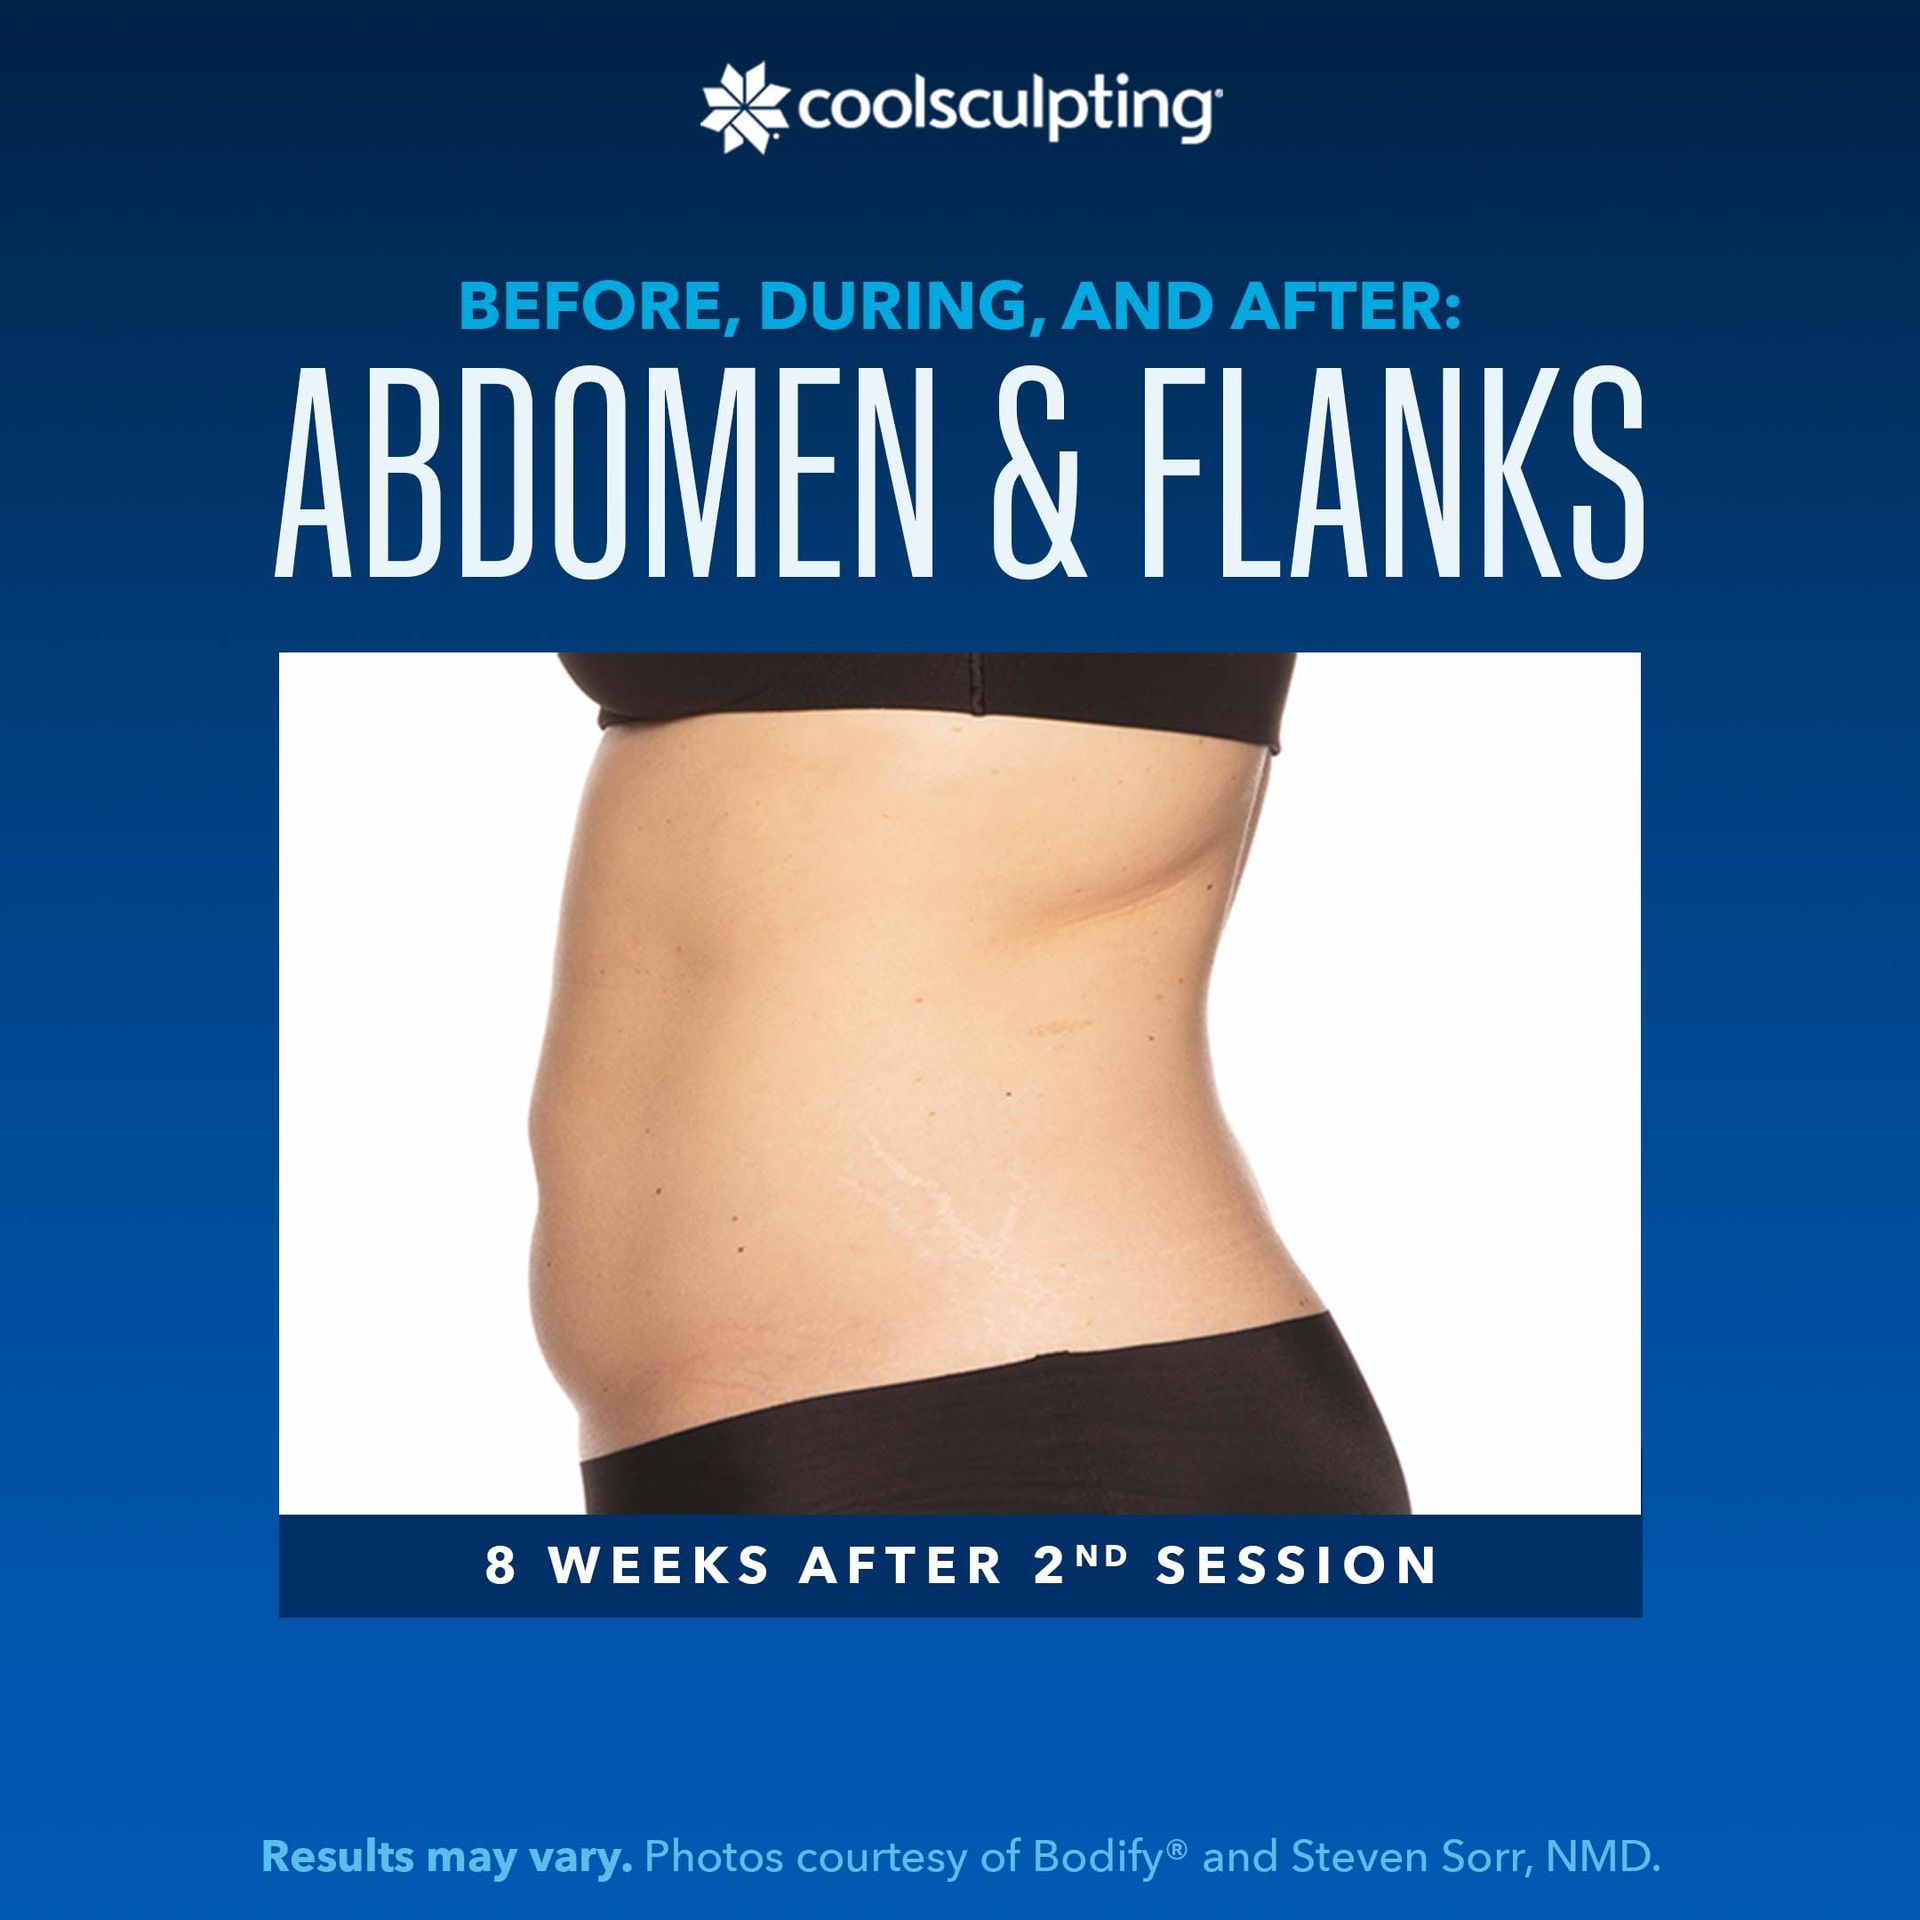 a before and after picture of a woman's abdomen and flanks for coolsculpting treatment